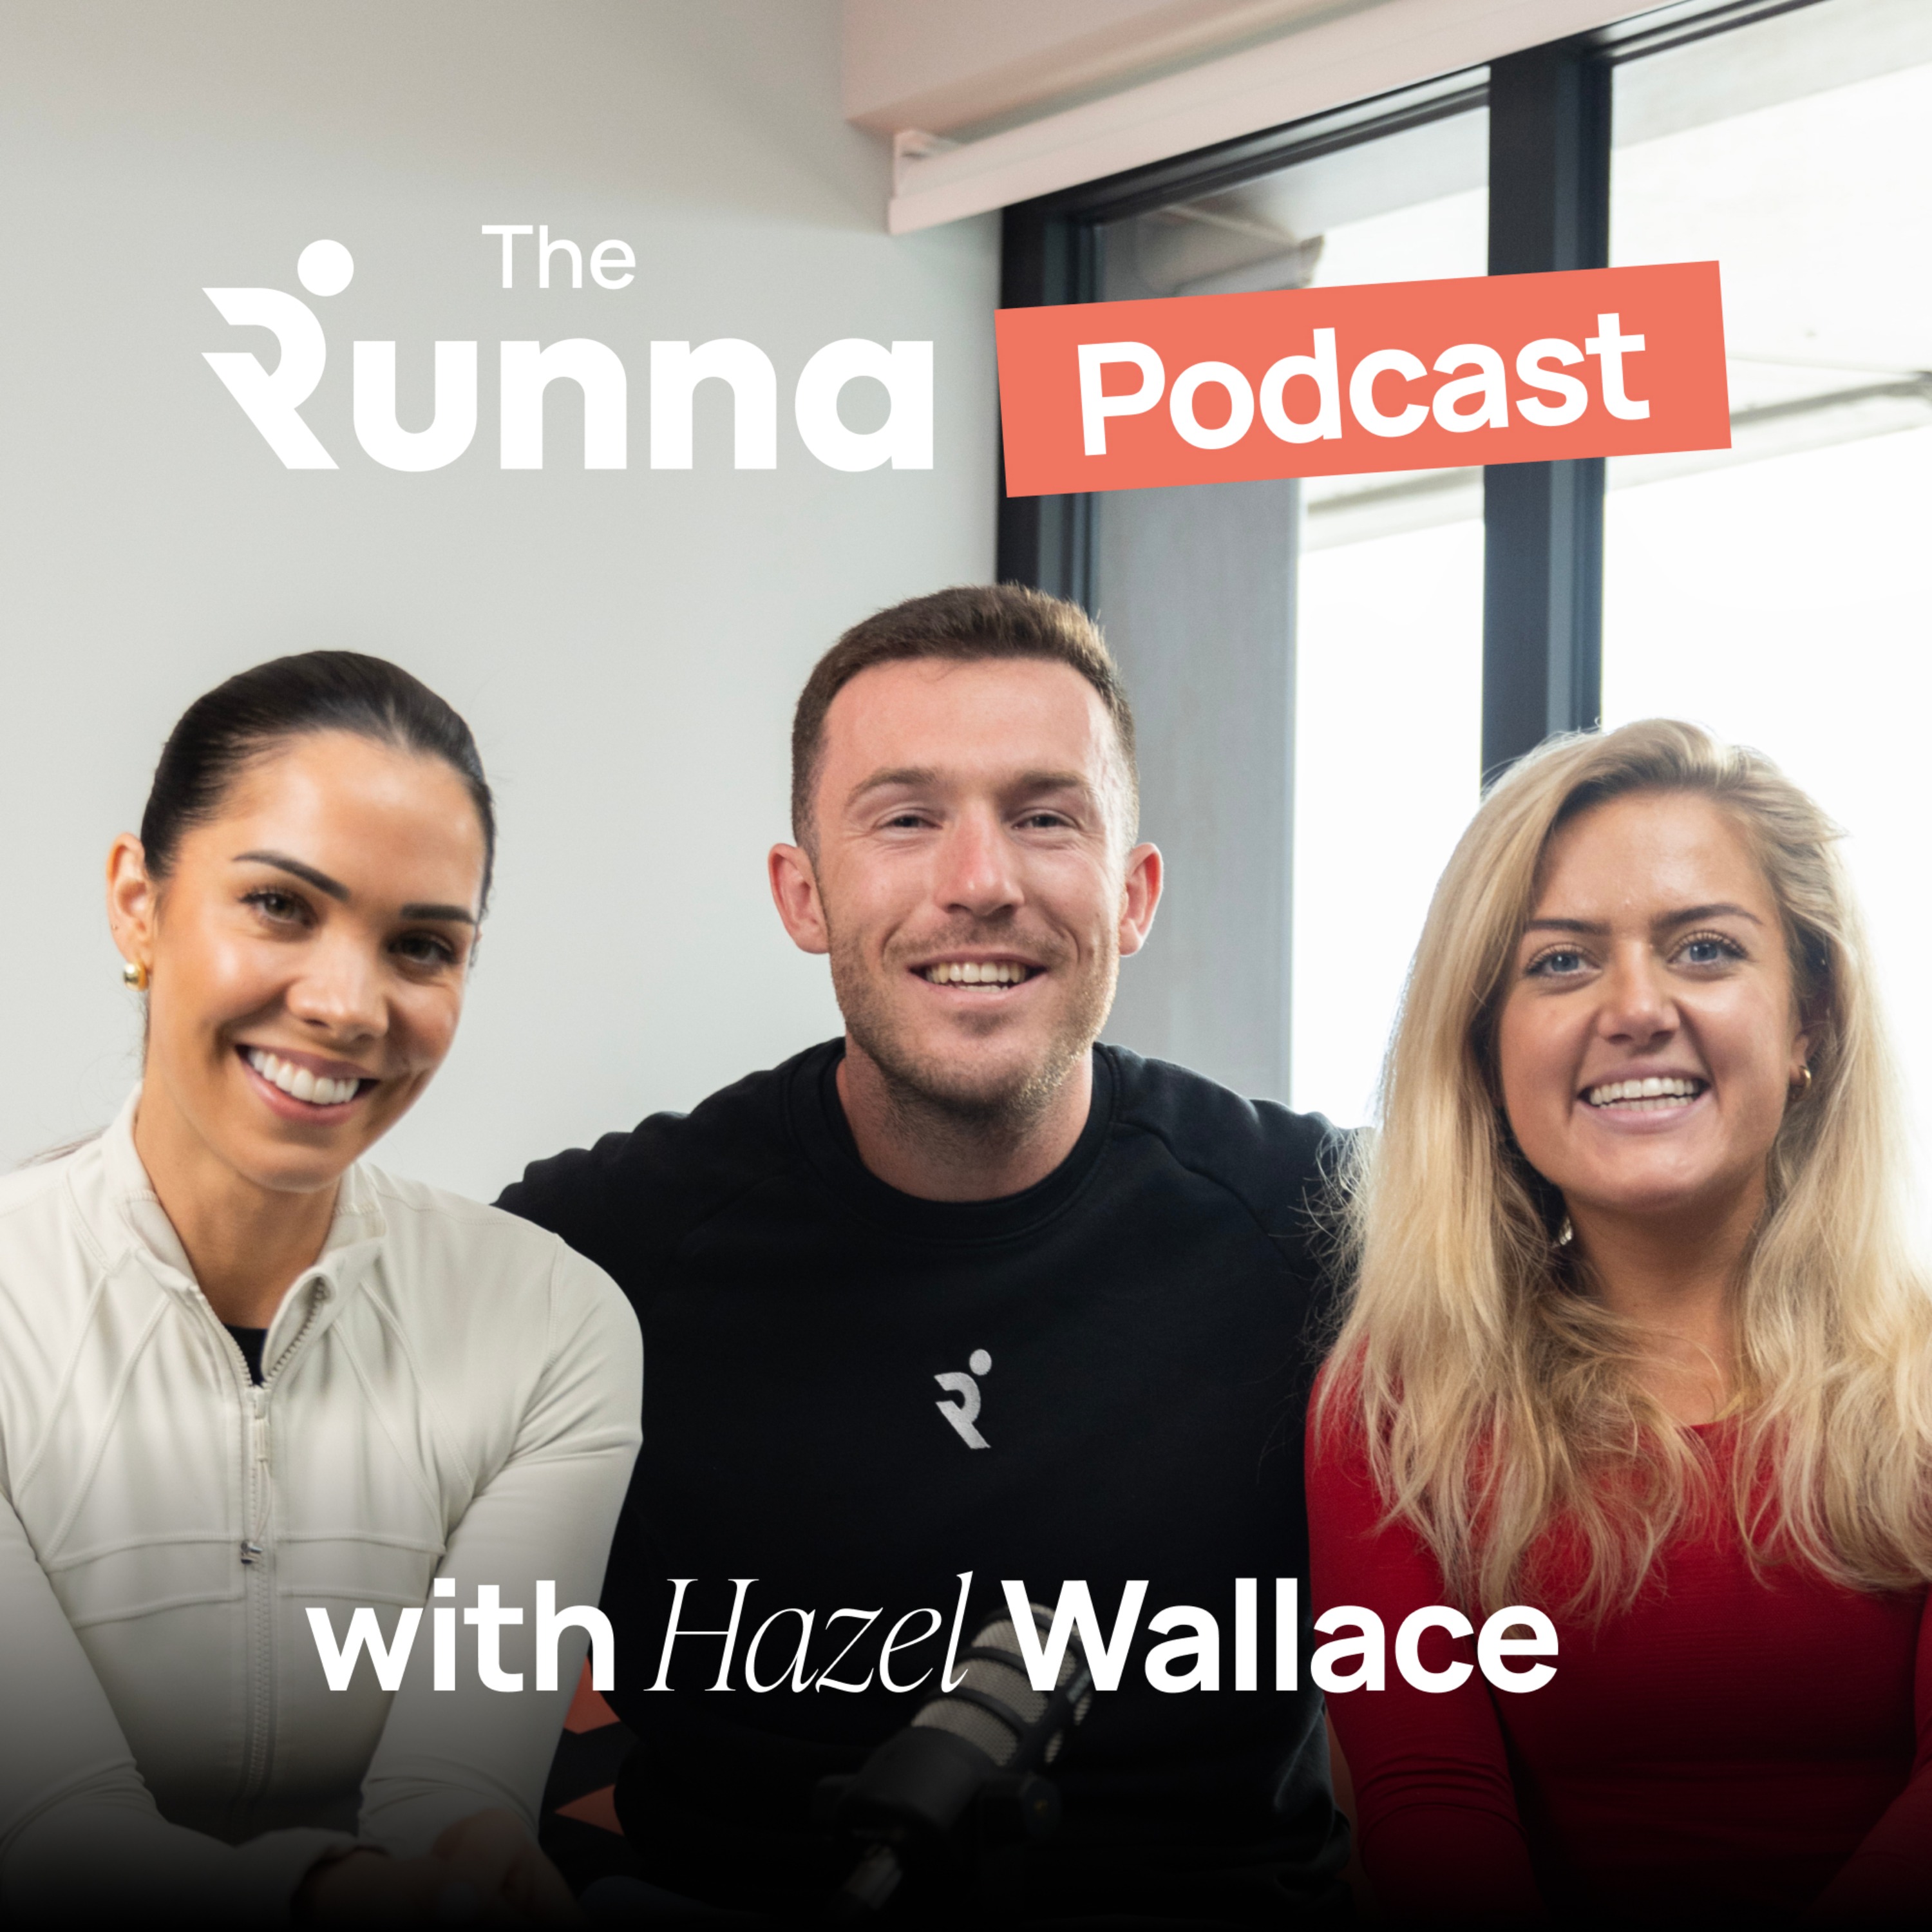 Hazel Wallace: Episode 11 - Nutrition, Listening to your Body and Managing your Cycle as a Runner